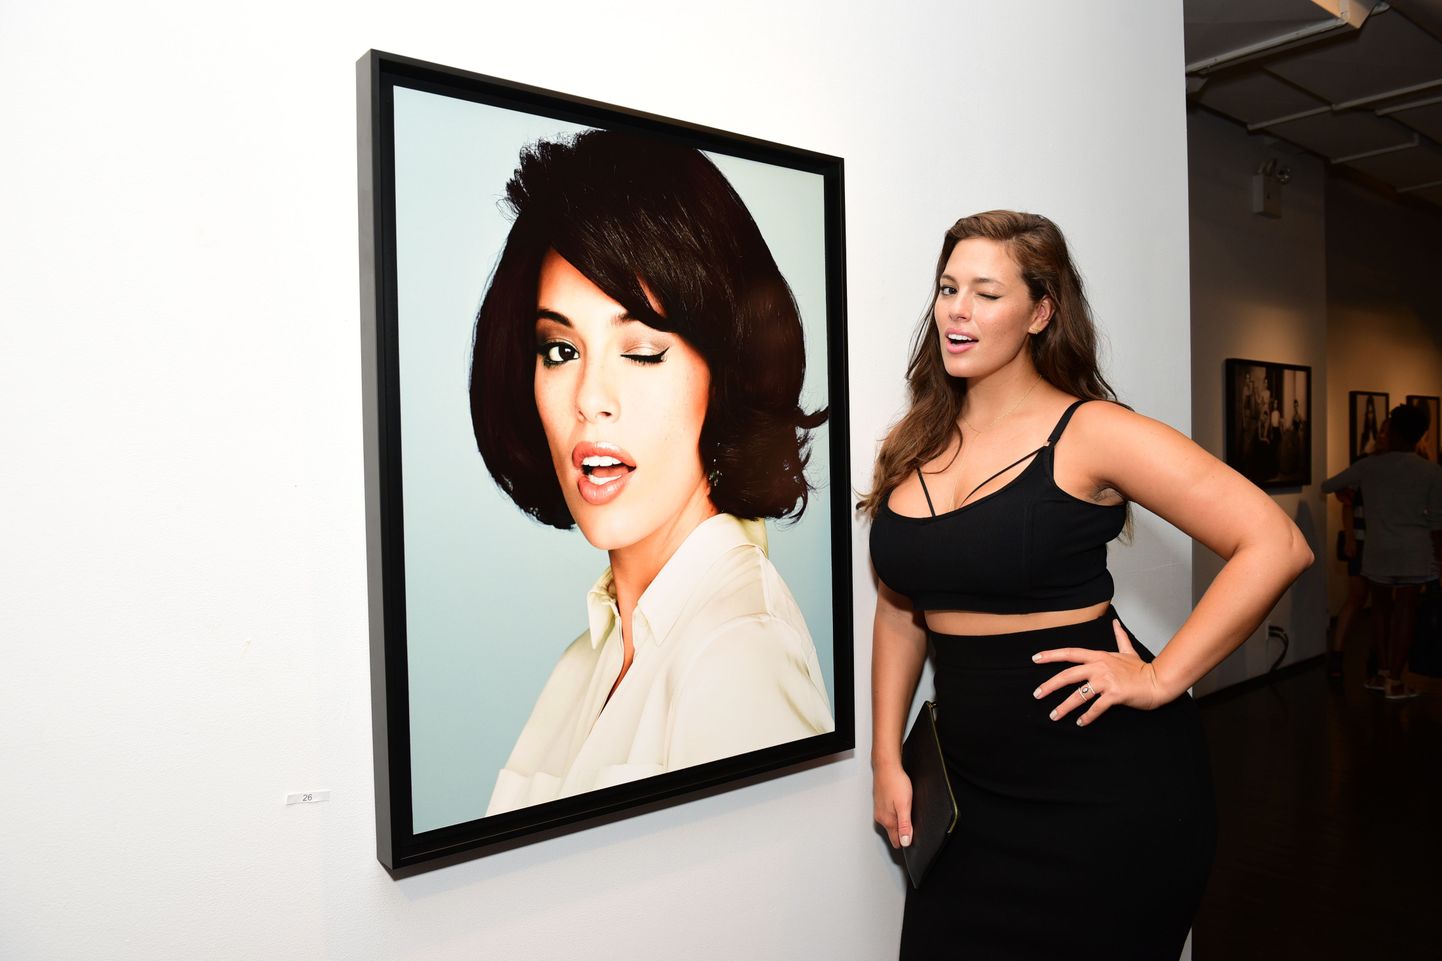 Ashley Graham -  September 9, 2015 - Real Love Opening Night by Paul Warren and Photographer Jeff An with Ashley Graham held at 555 West 26th Street, NYC. (Photo by Sean Zanni/Patrick McMullan) *** Please Use Credit from Credit Field ***